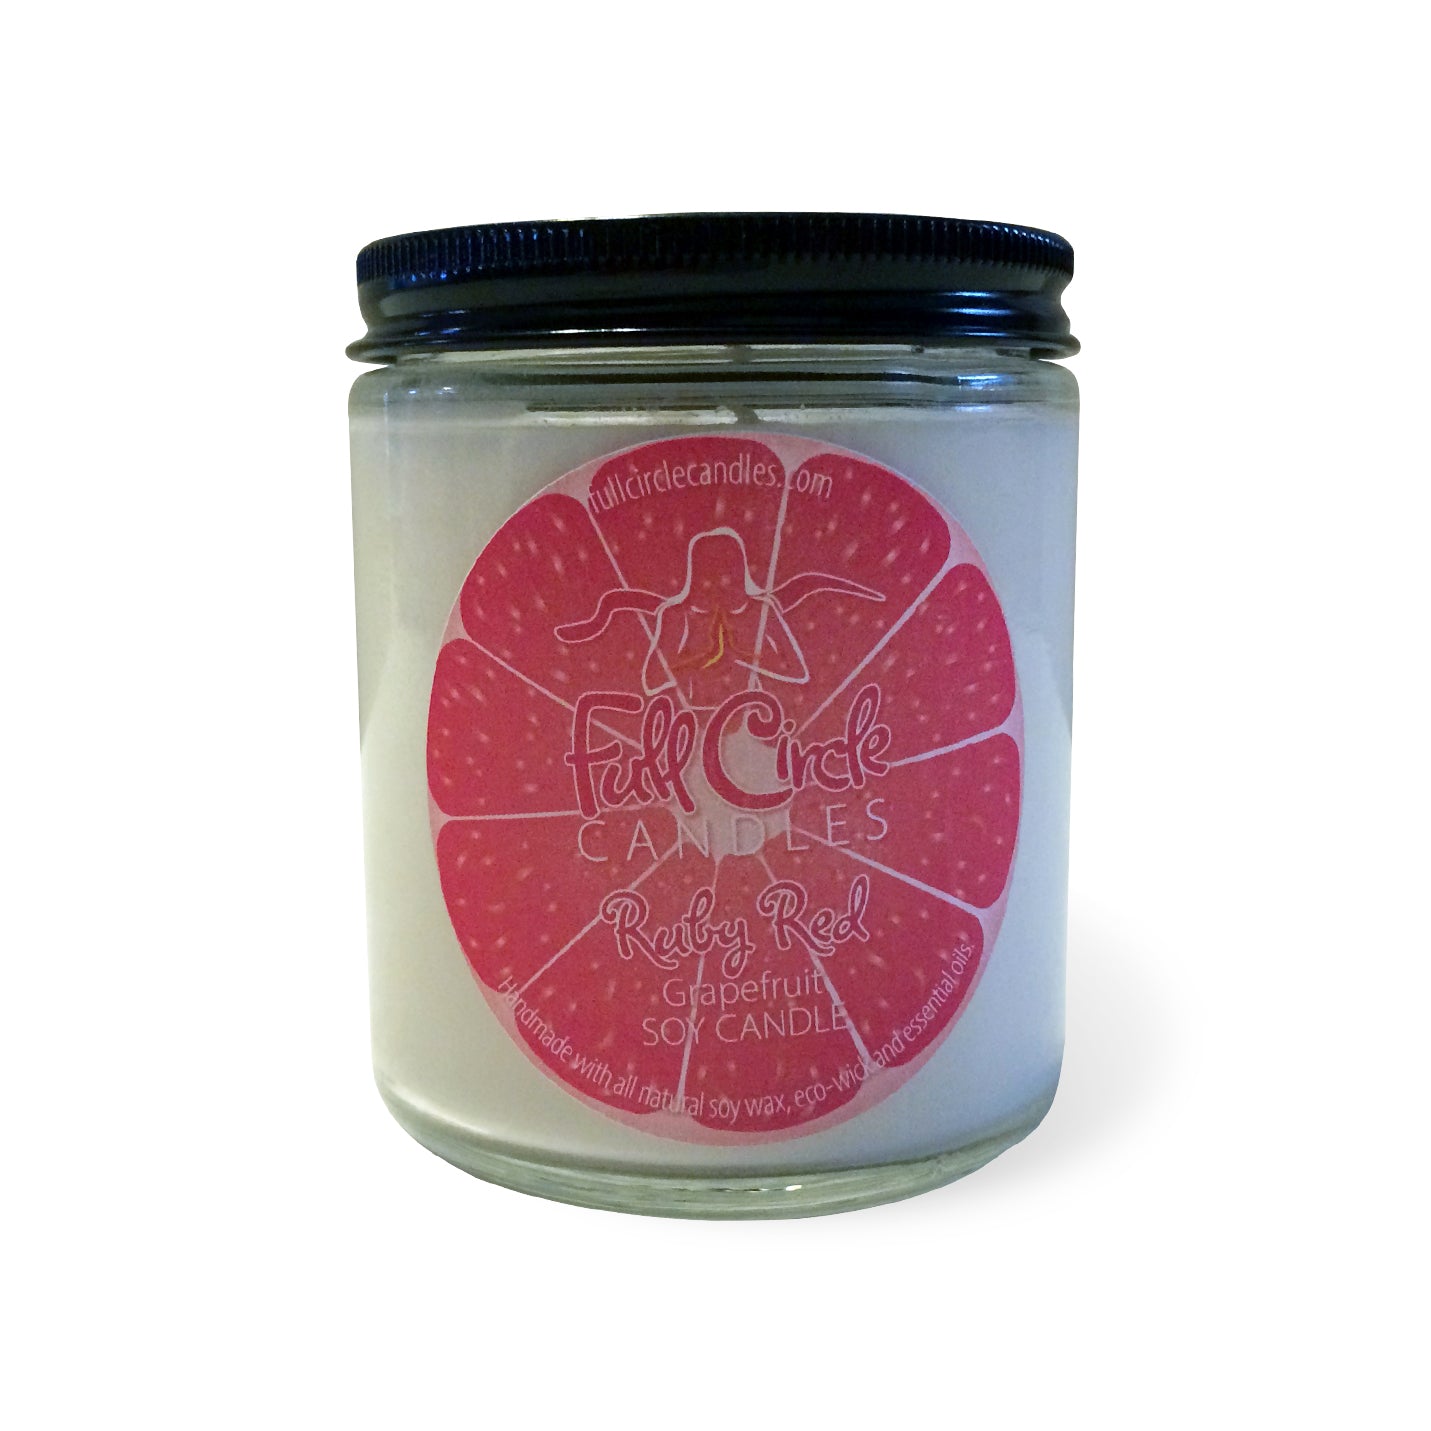 Grapefruit Soy Candle | Full Circle Candles